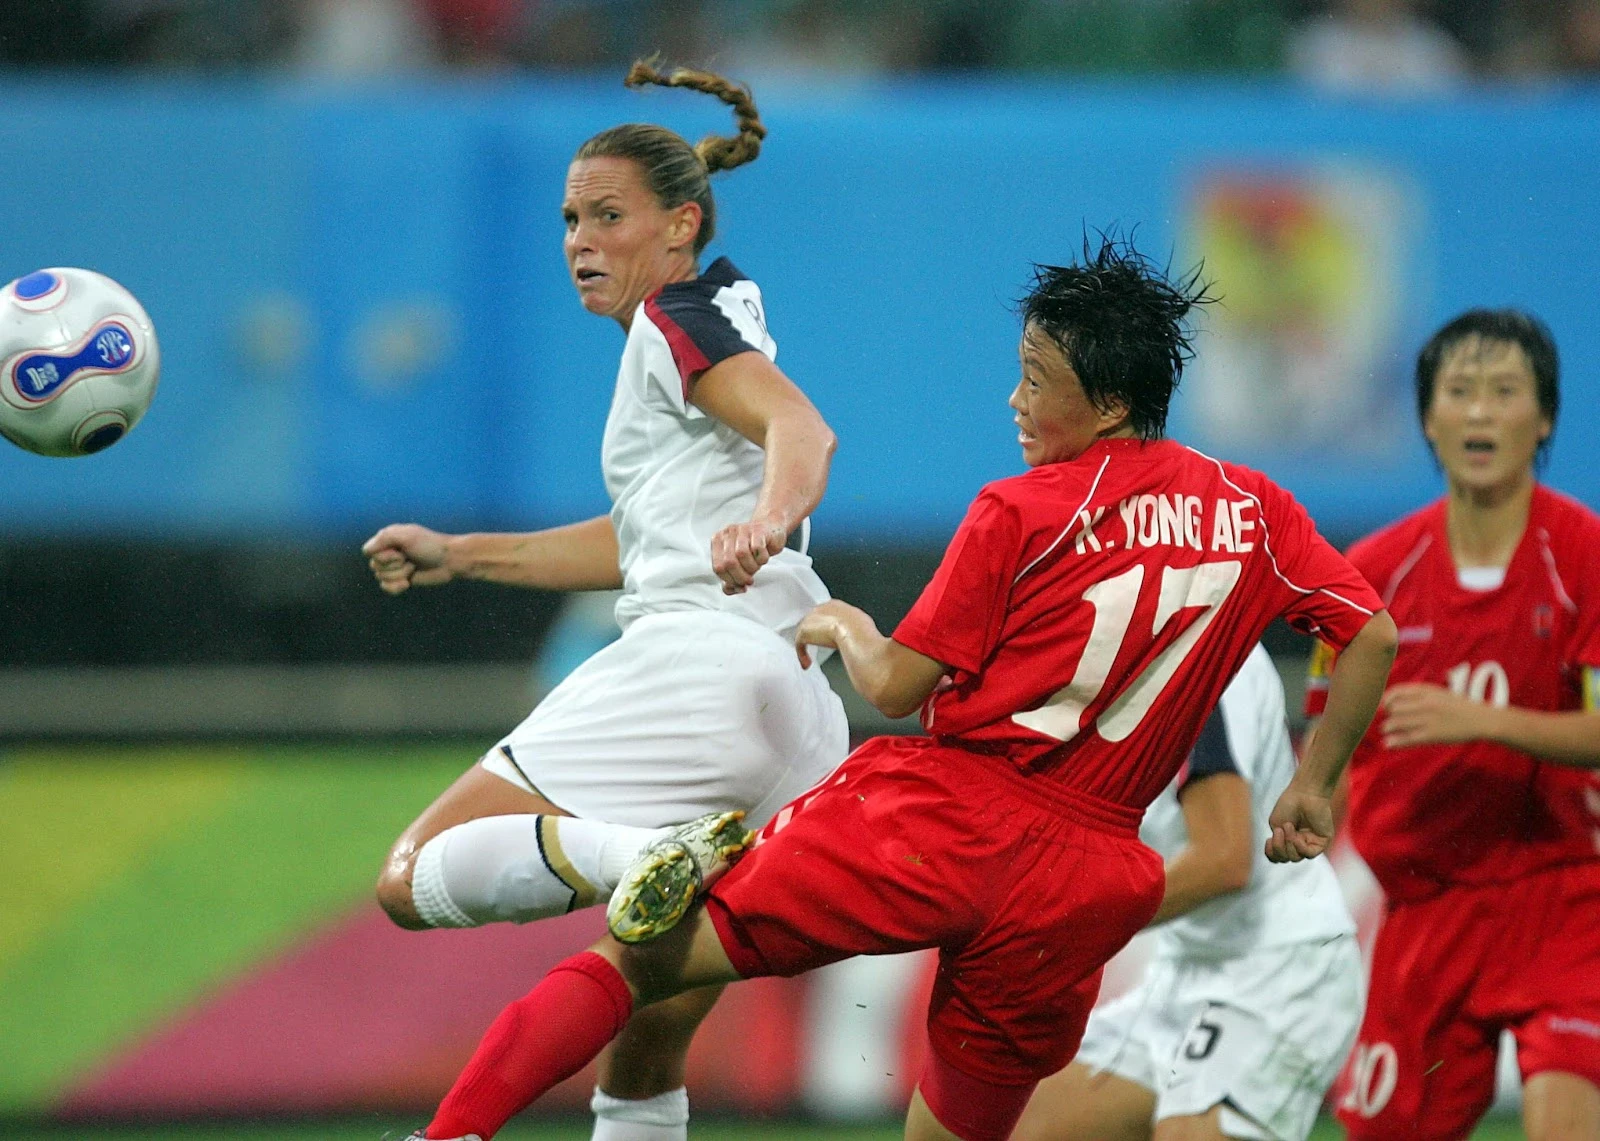 Christie Rampone of the USA moves the ball away from Kim Yong Ae of Korea.